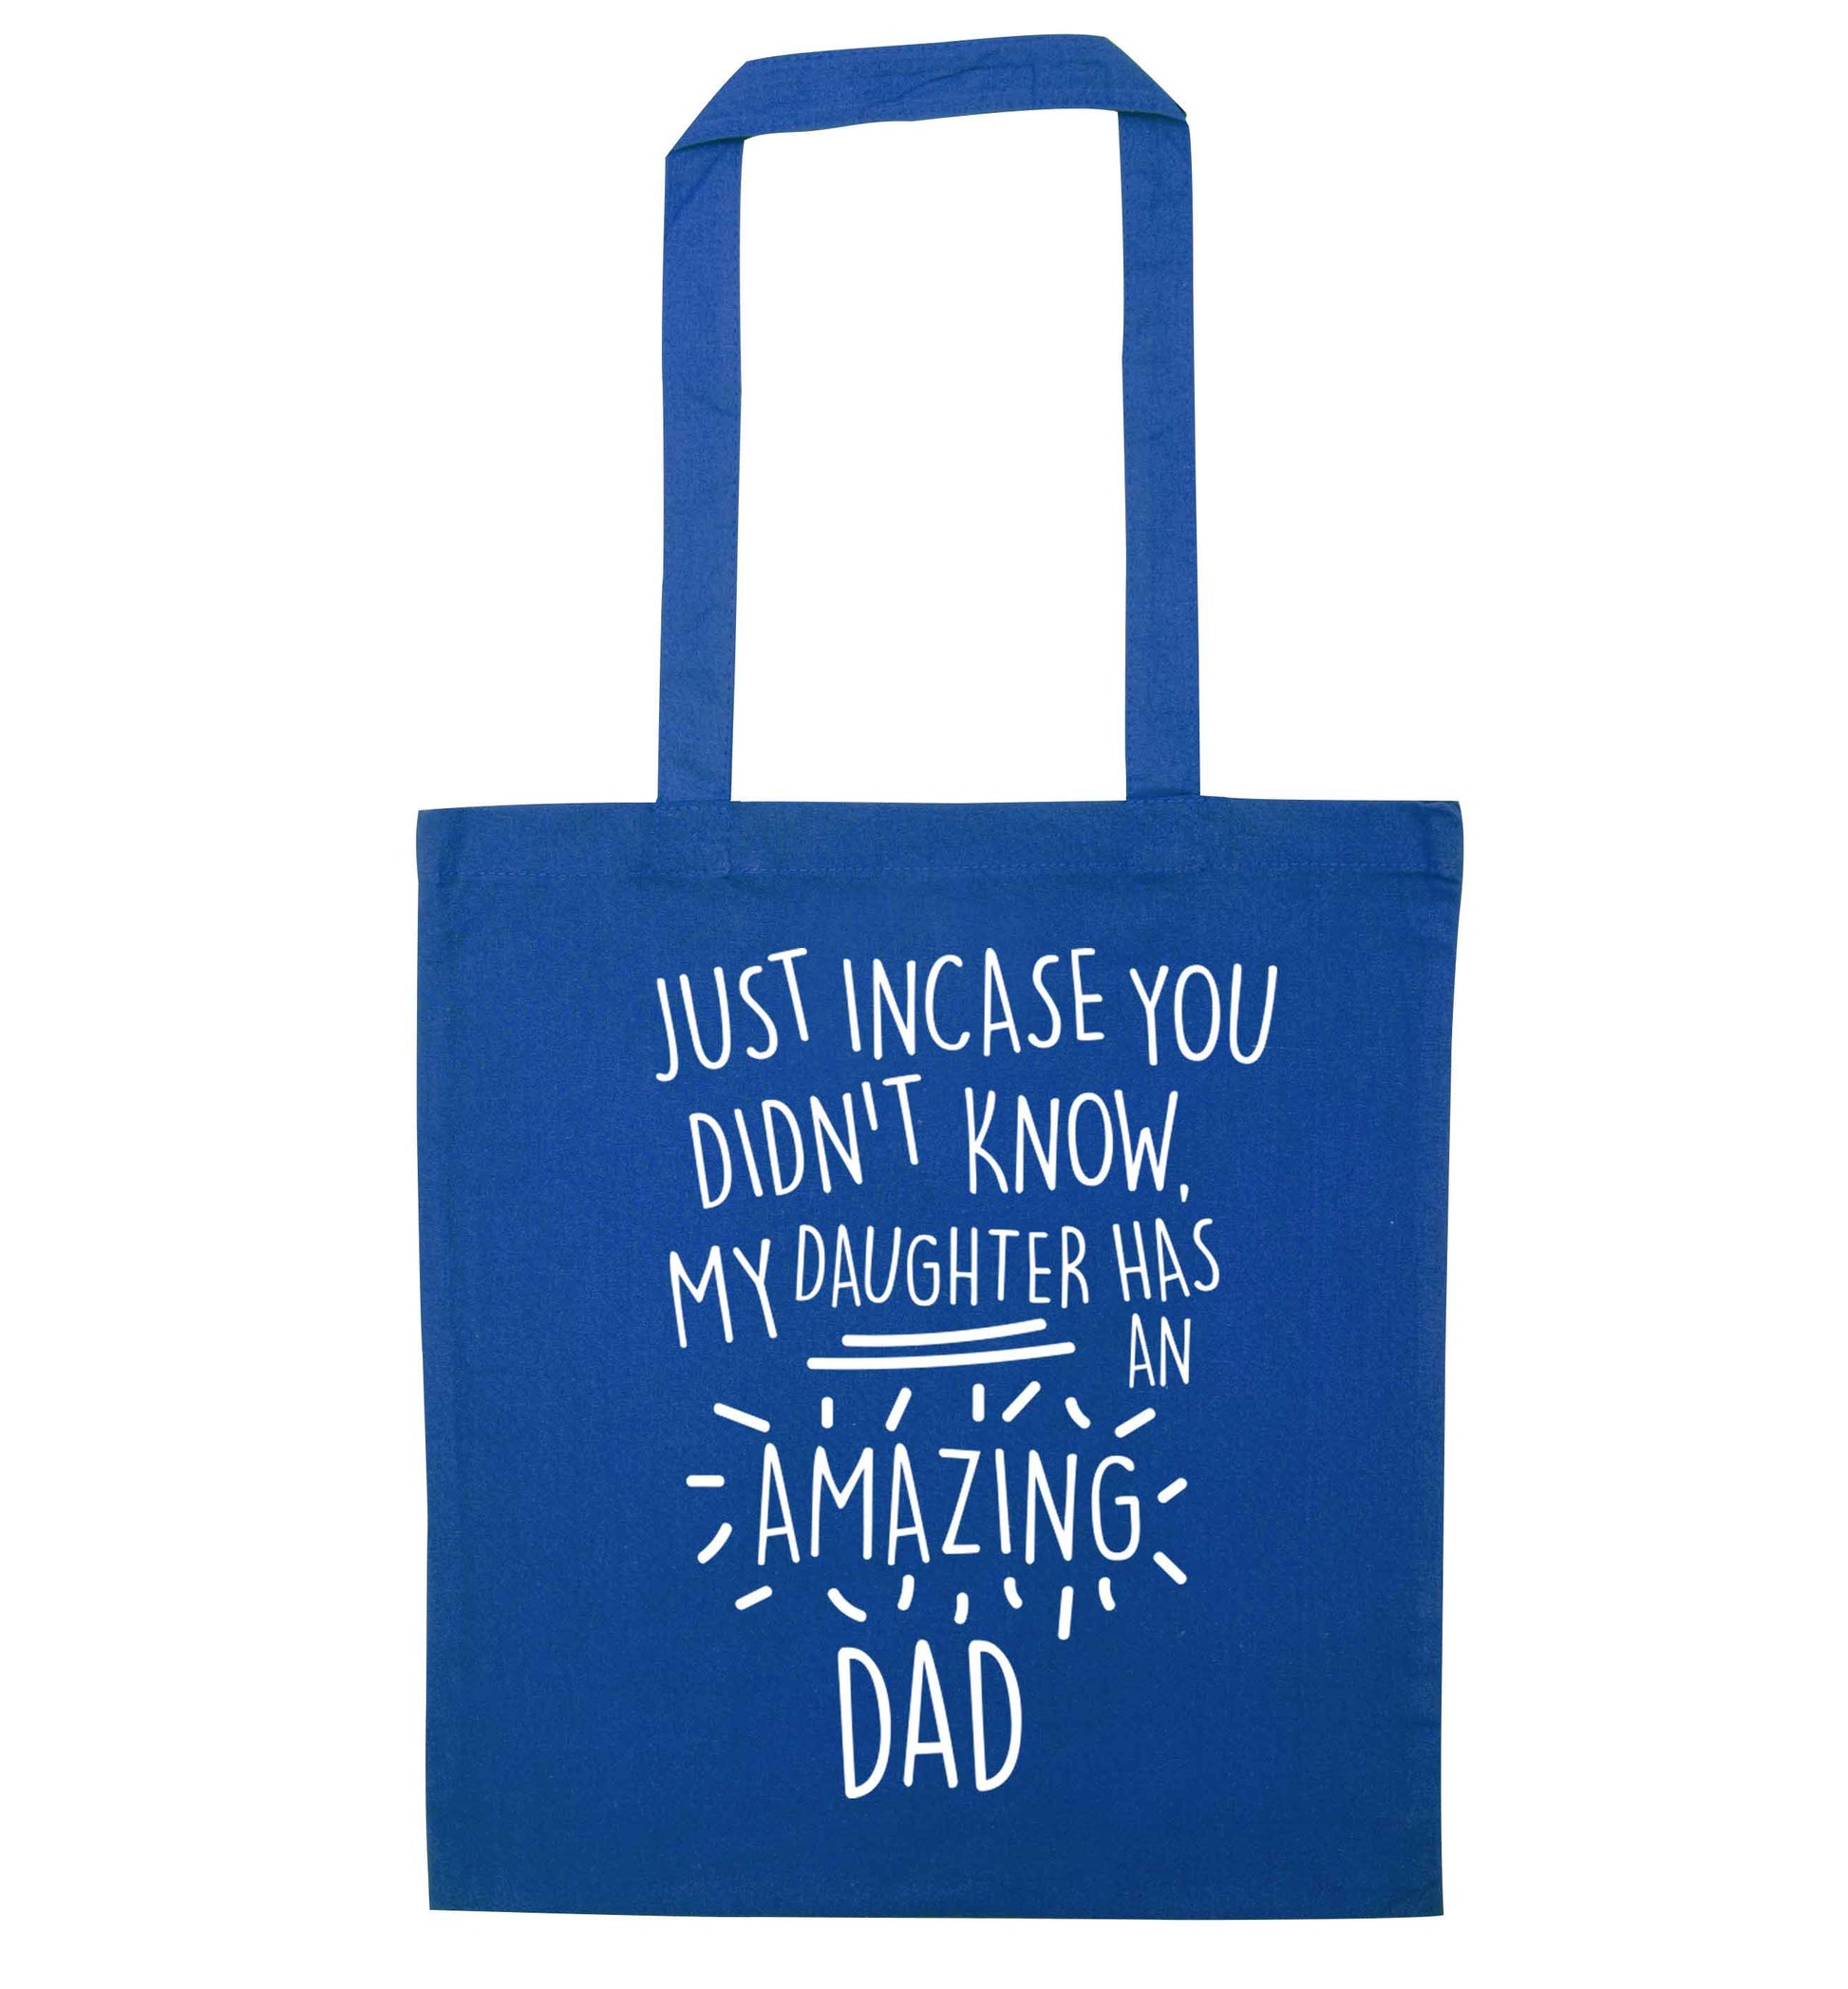 Just incase you didn't know my daughter has an amazing dad blue tote bag